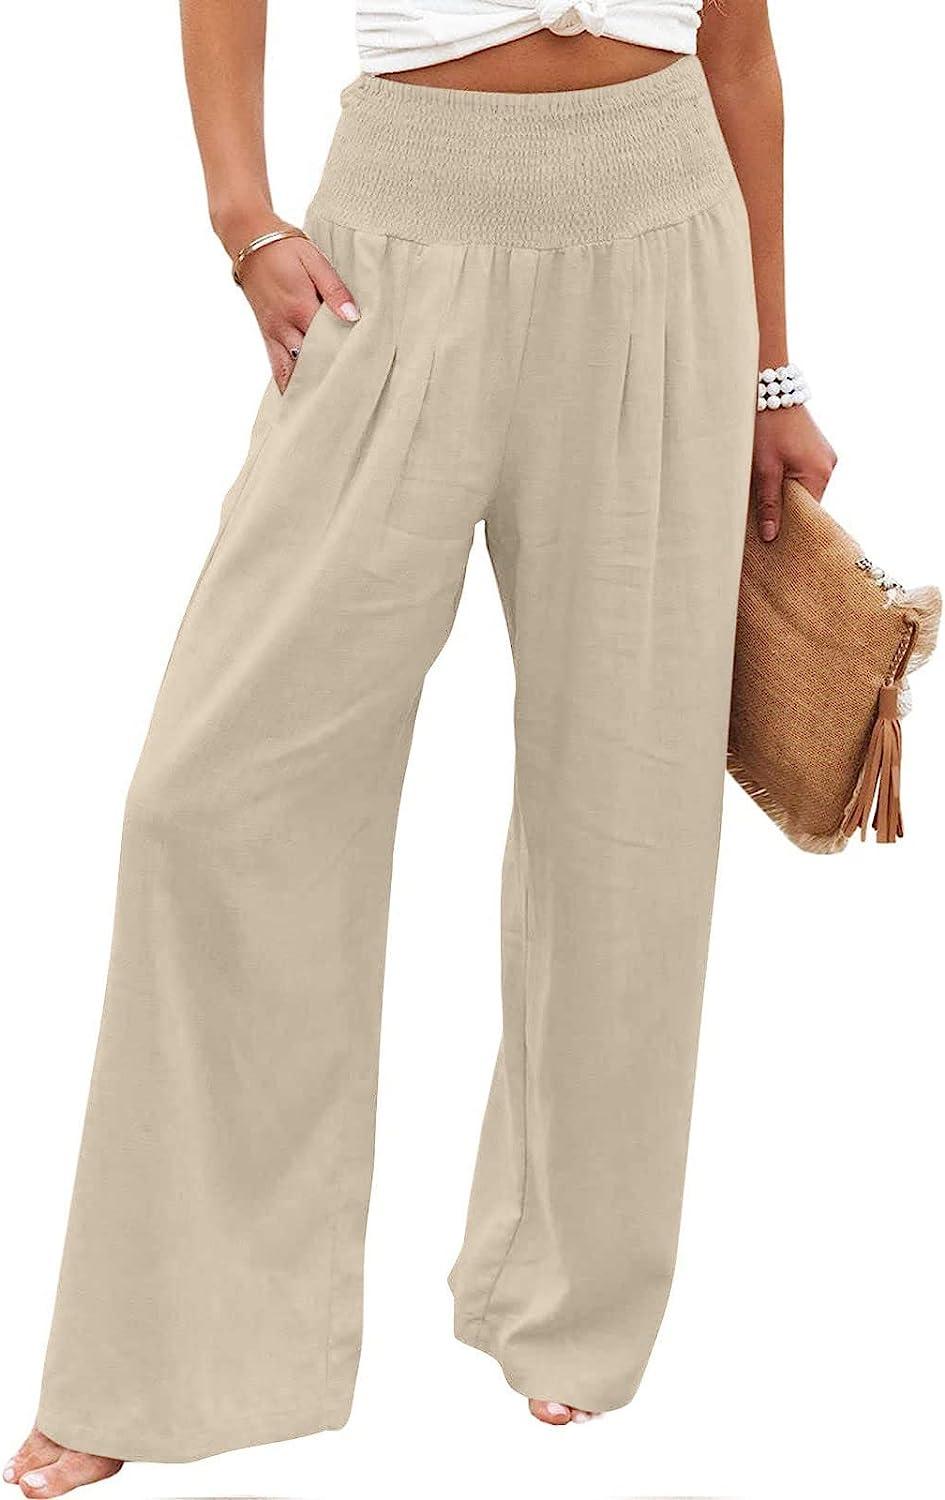 SELONE Flowy Linen Pants for Women With Pockets High Waist High Rise Casual Long  Pant Straight Leg Fashion Comfortable Solid Color Leisure Pants Loose Pants  for Everyday Wear Running Work Beige S 